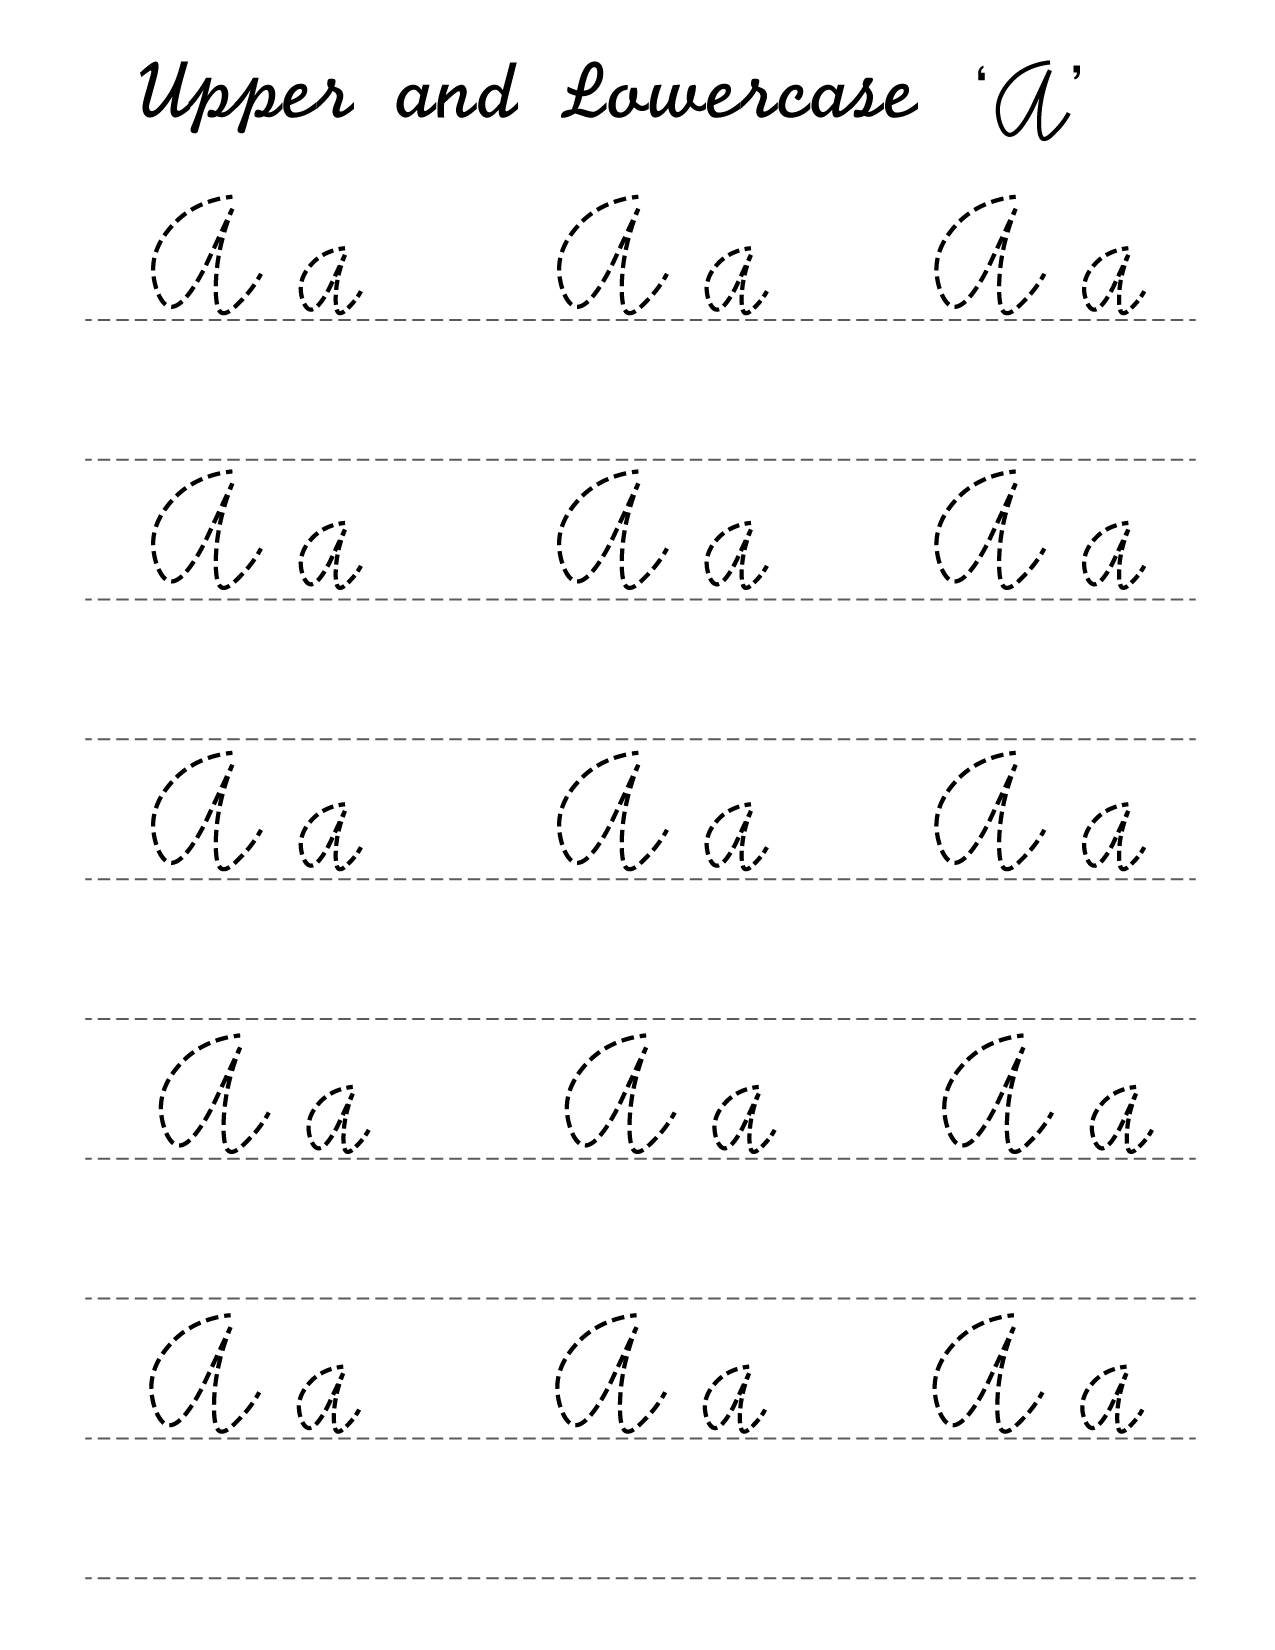 Upper and lowercase cursive A